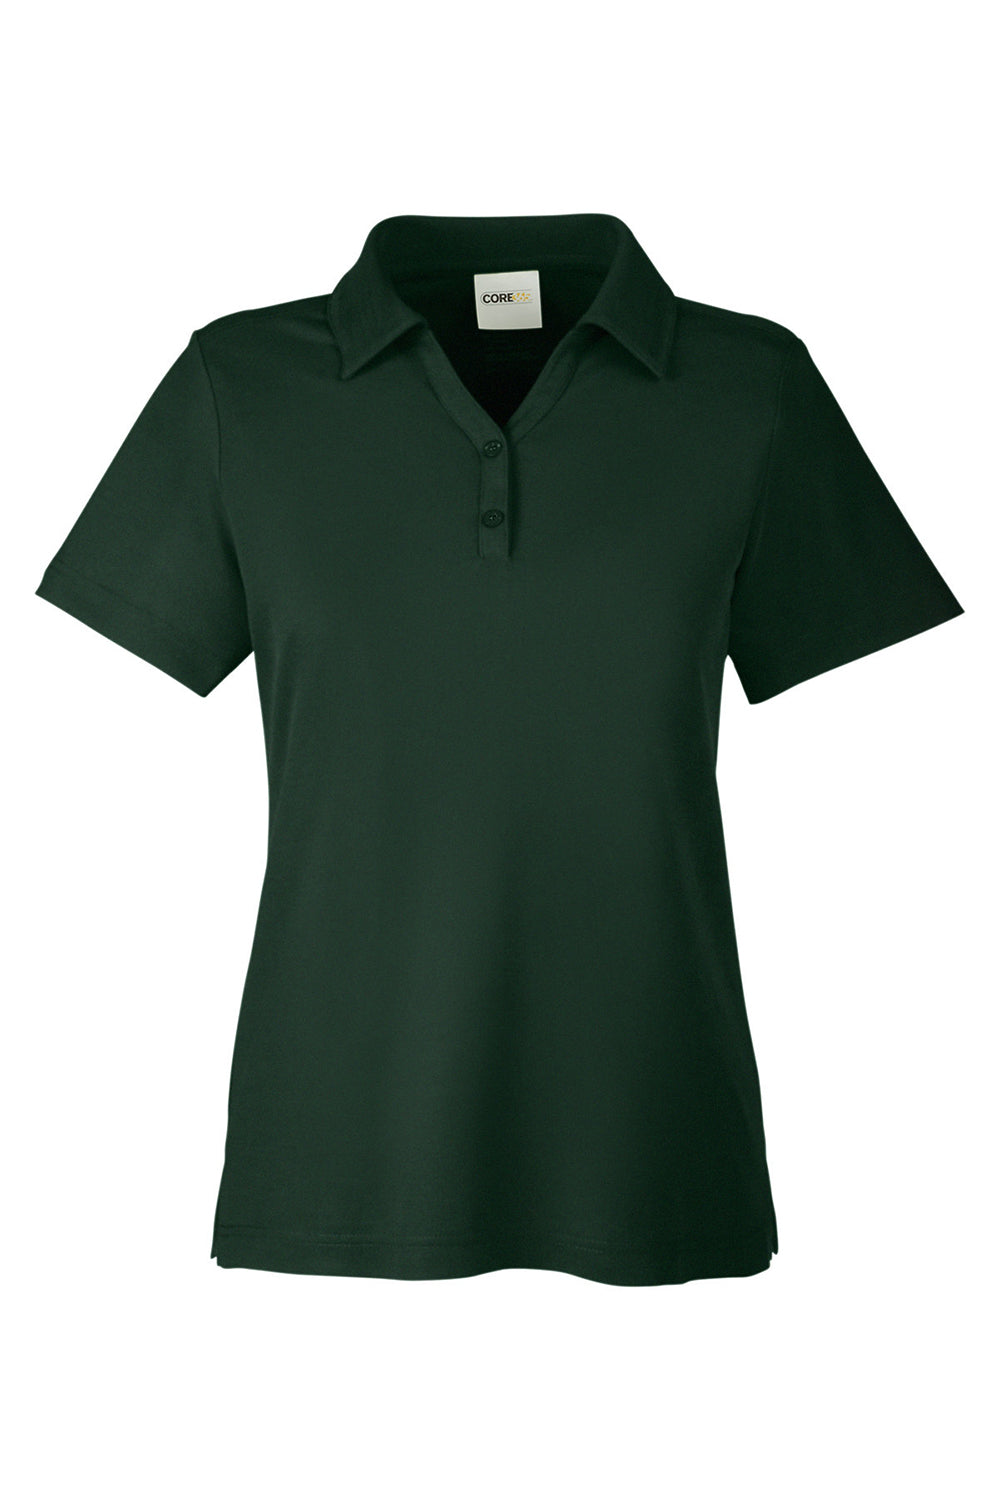 Core 365 CE112W Womens Fusion ChromaSoft Performance Moisture Wicking Pique Short Sleeve Polo Shirt Forest Green Flat Front